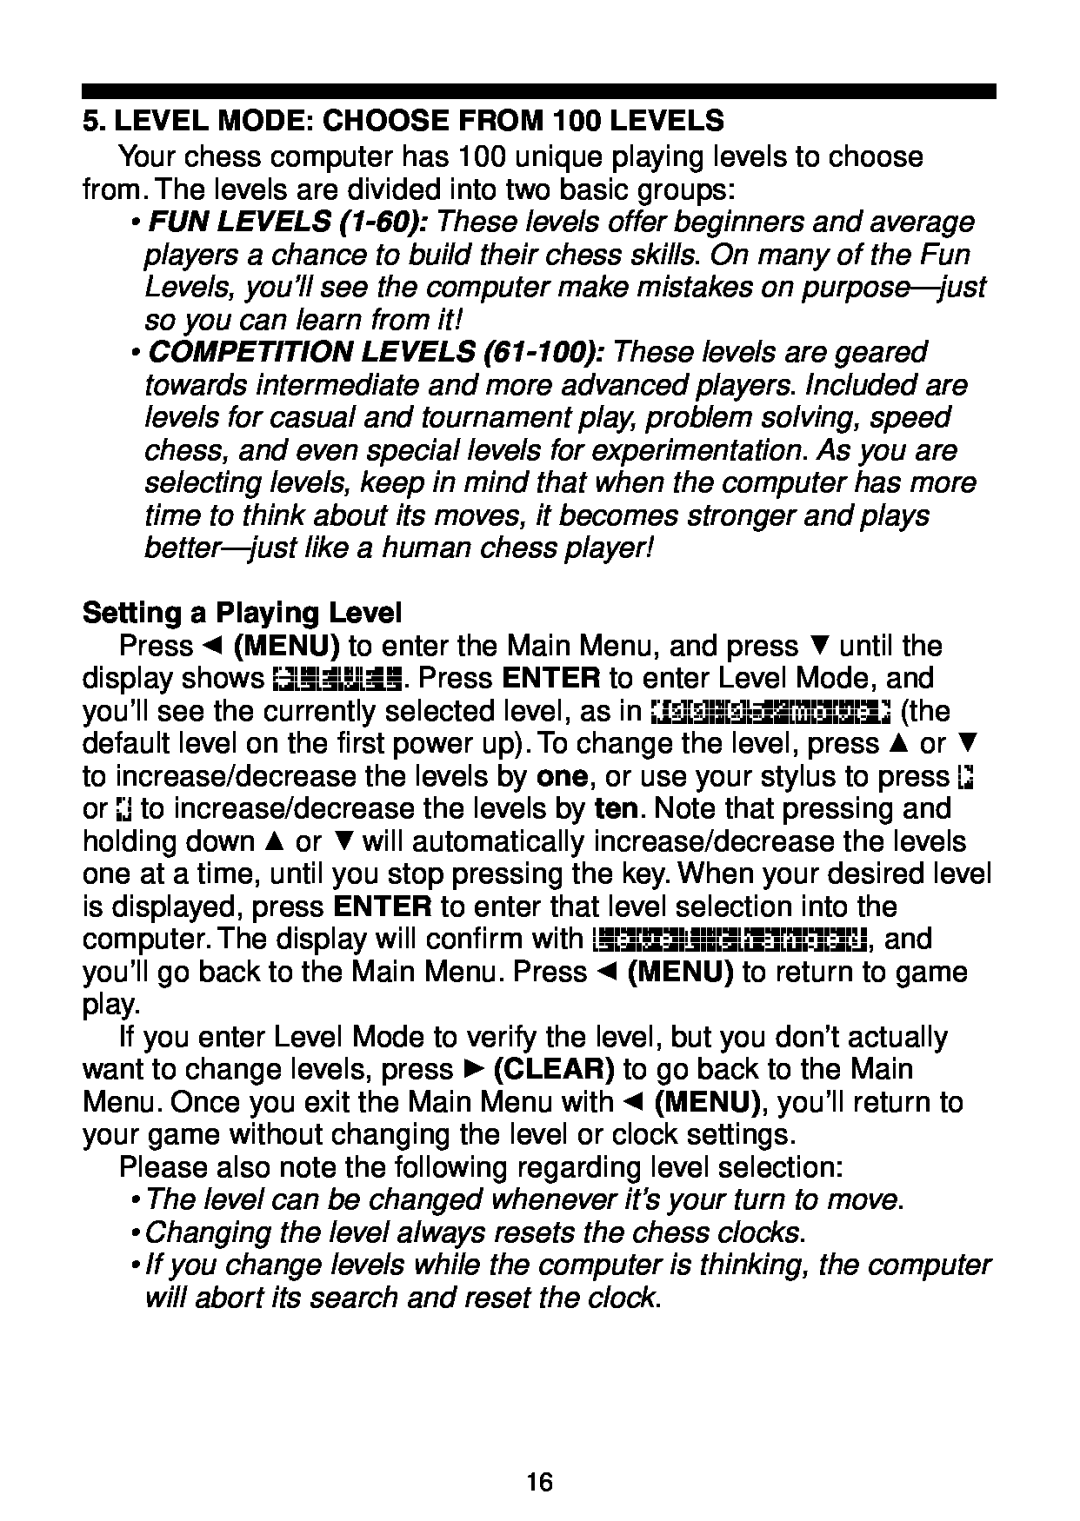 Saitek Maestro Travel Chess Computer manual LEVEL MODE CHOOSE FROM 100 LEVELS, Setting a Playing Level 